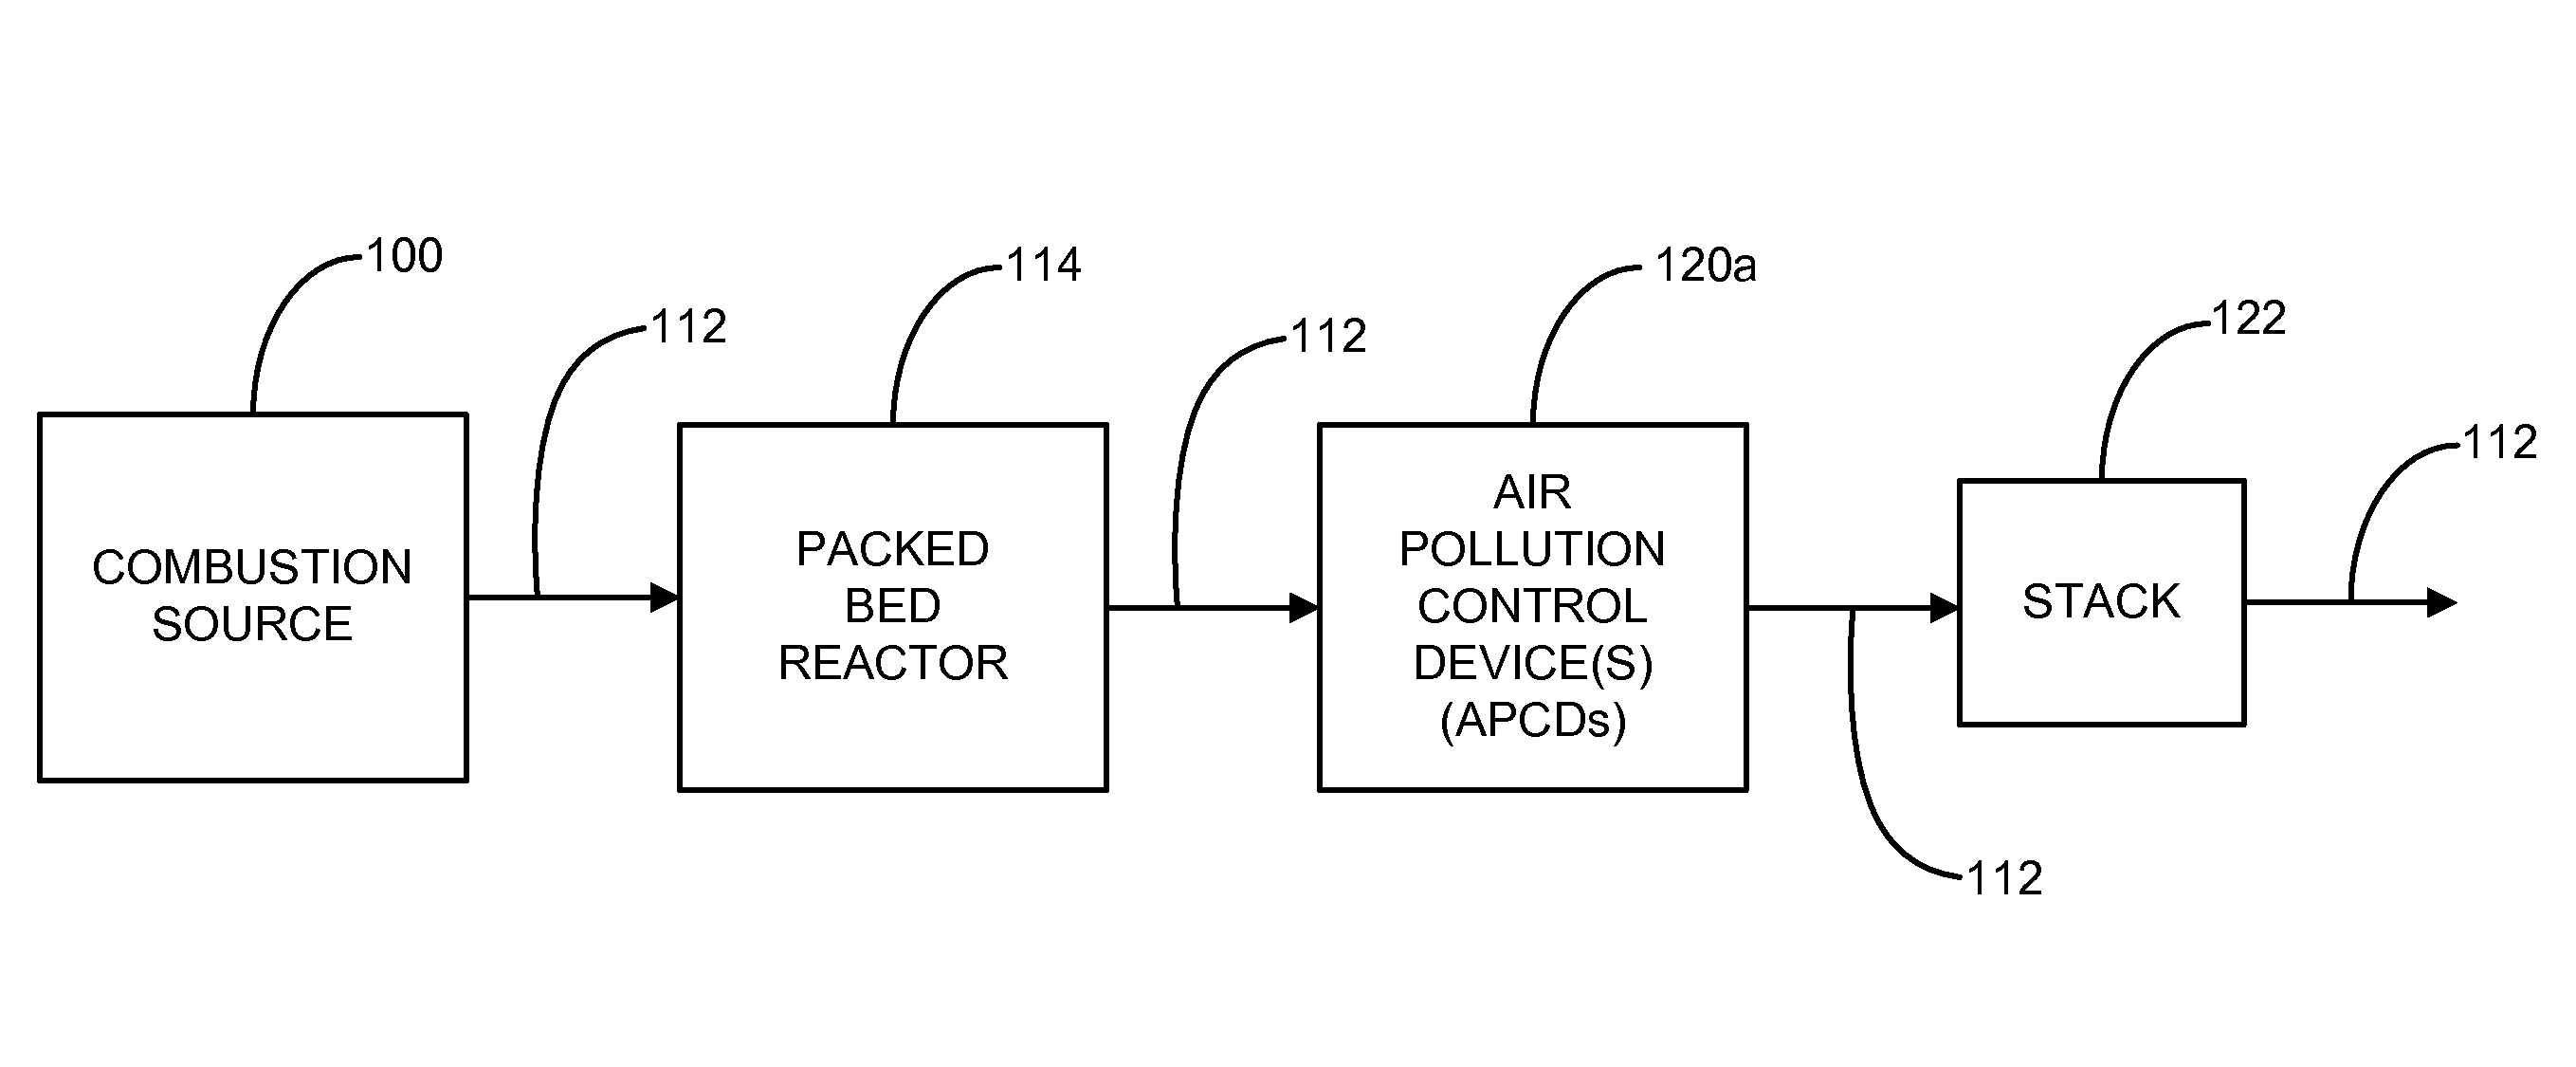 Methods and devices for reducing hazardous air pollutants